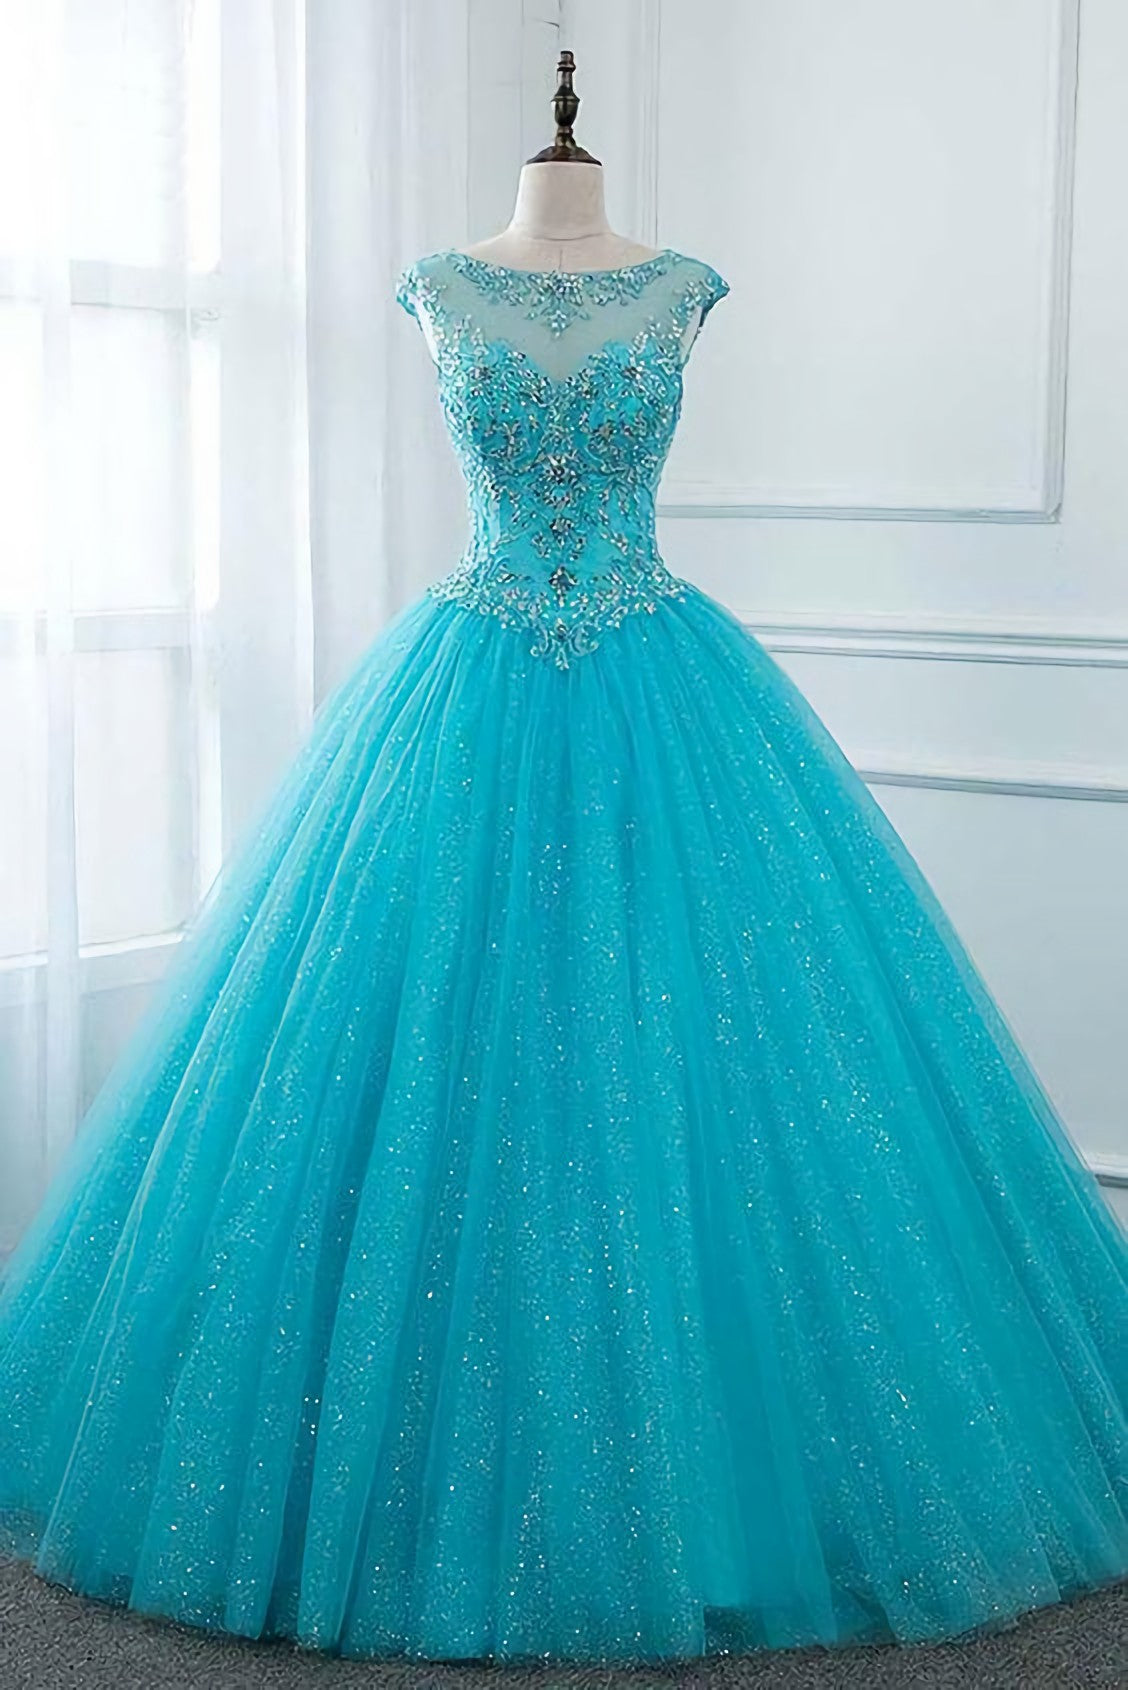 Prom Dress Light Blue, Elegant Long Ball Gown Quinceanera Dresses, Beaded Corset Prom Gown